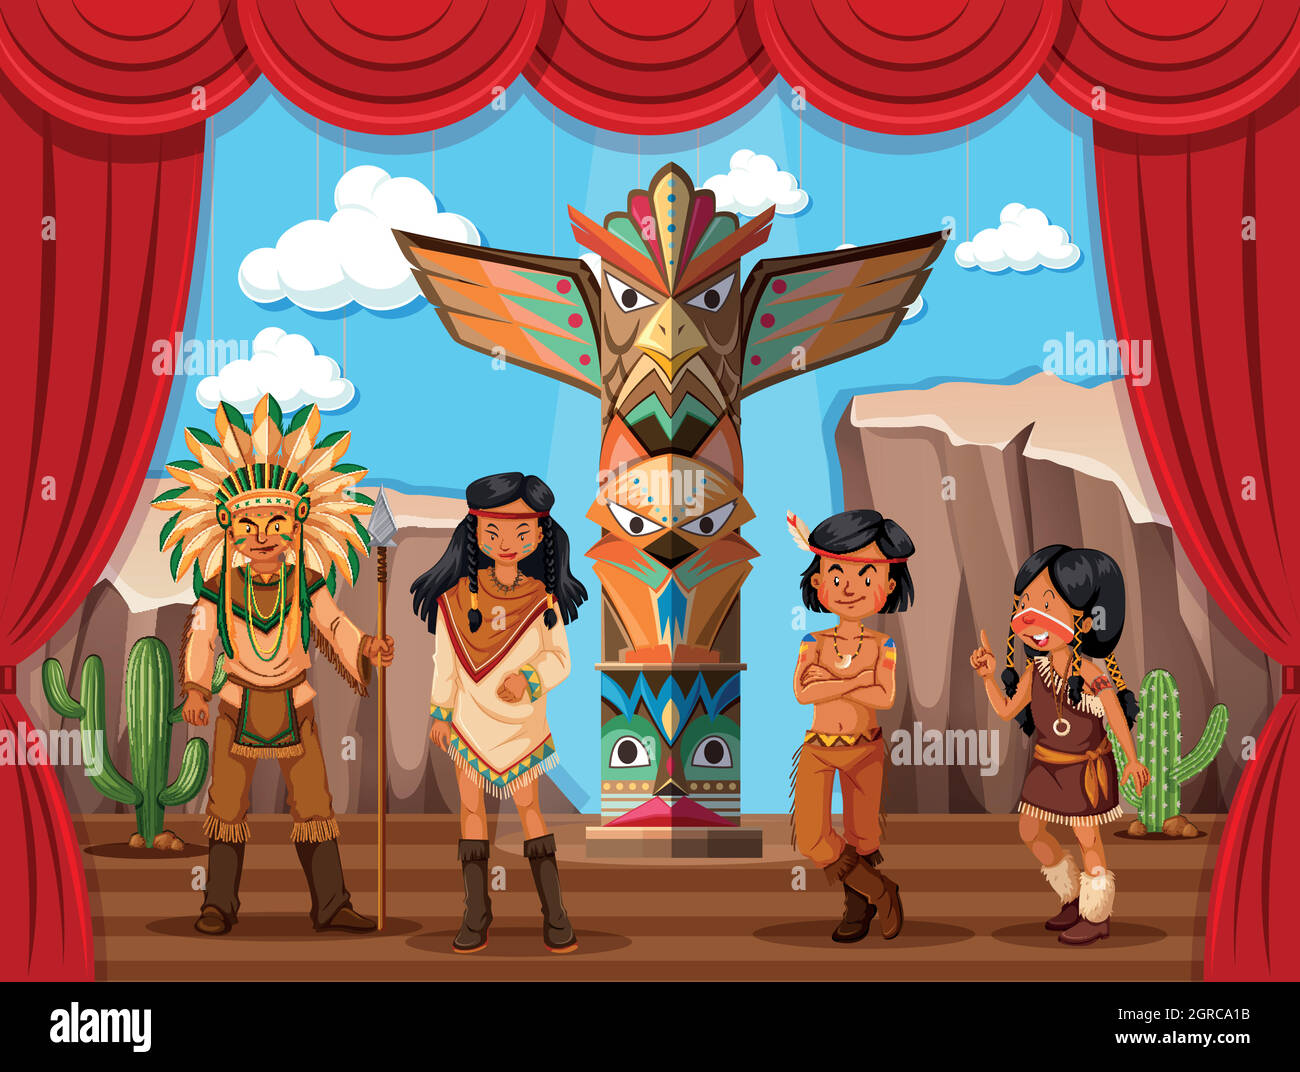 Native american tribe on stage Stock Vector